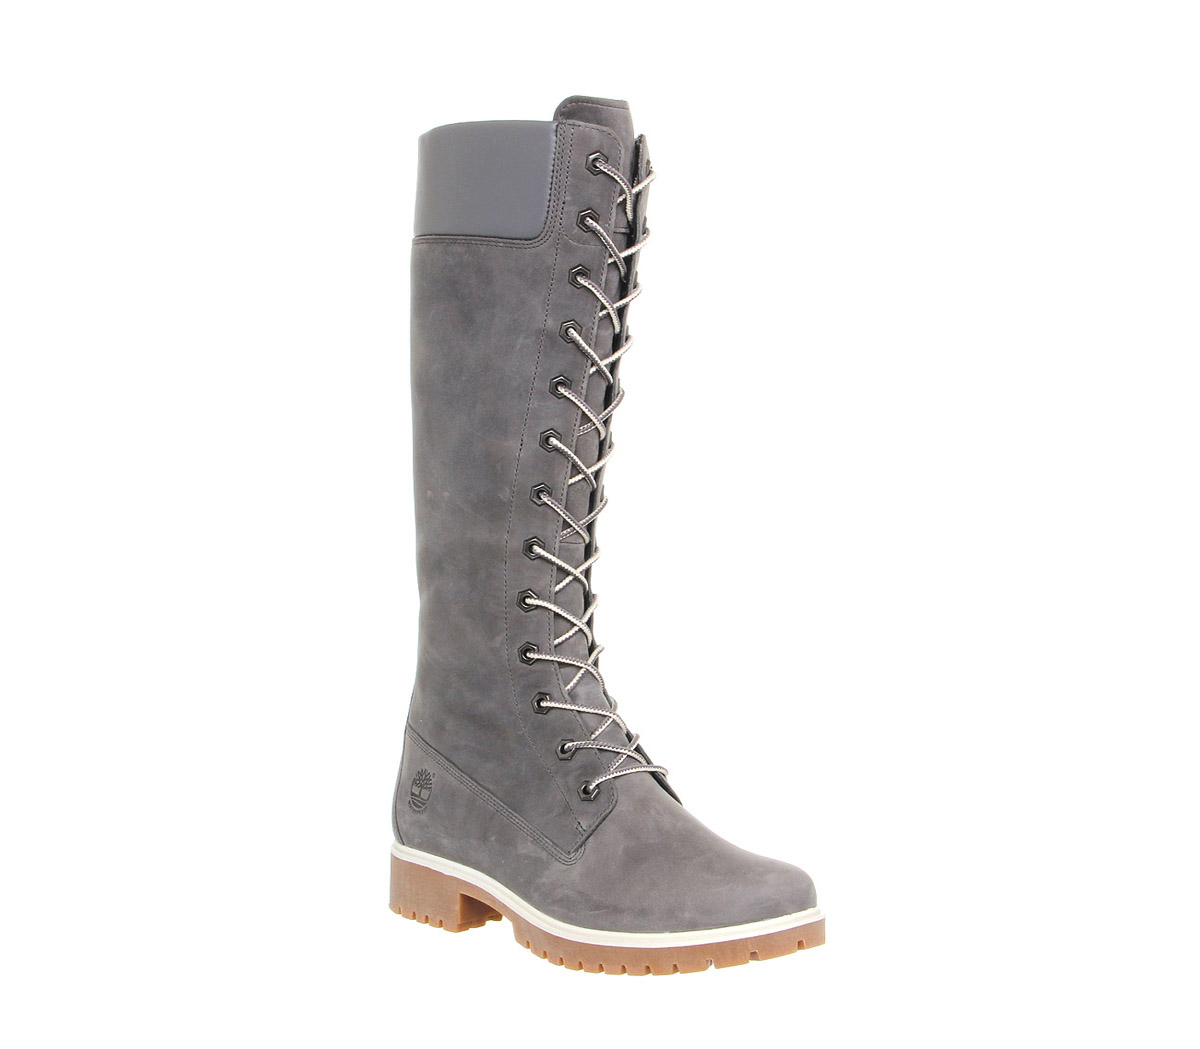 Timberland 14 Inch Premium Boot in Grey (Gray) - Lyst